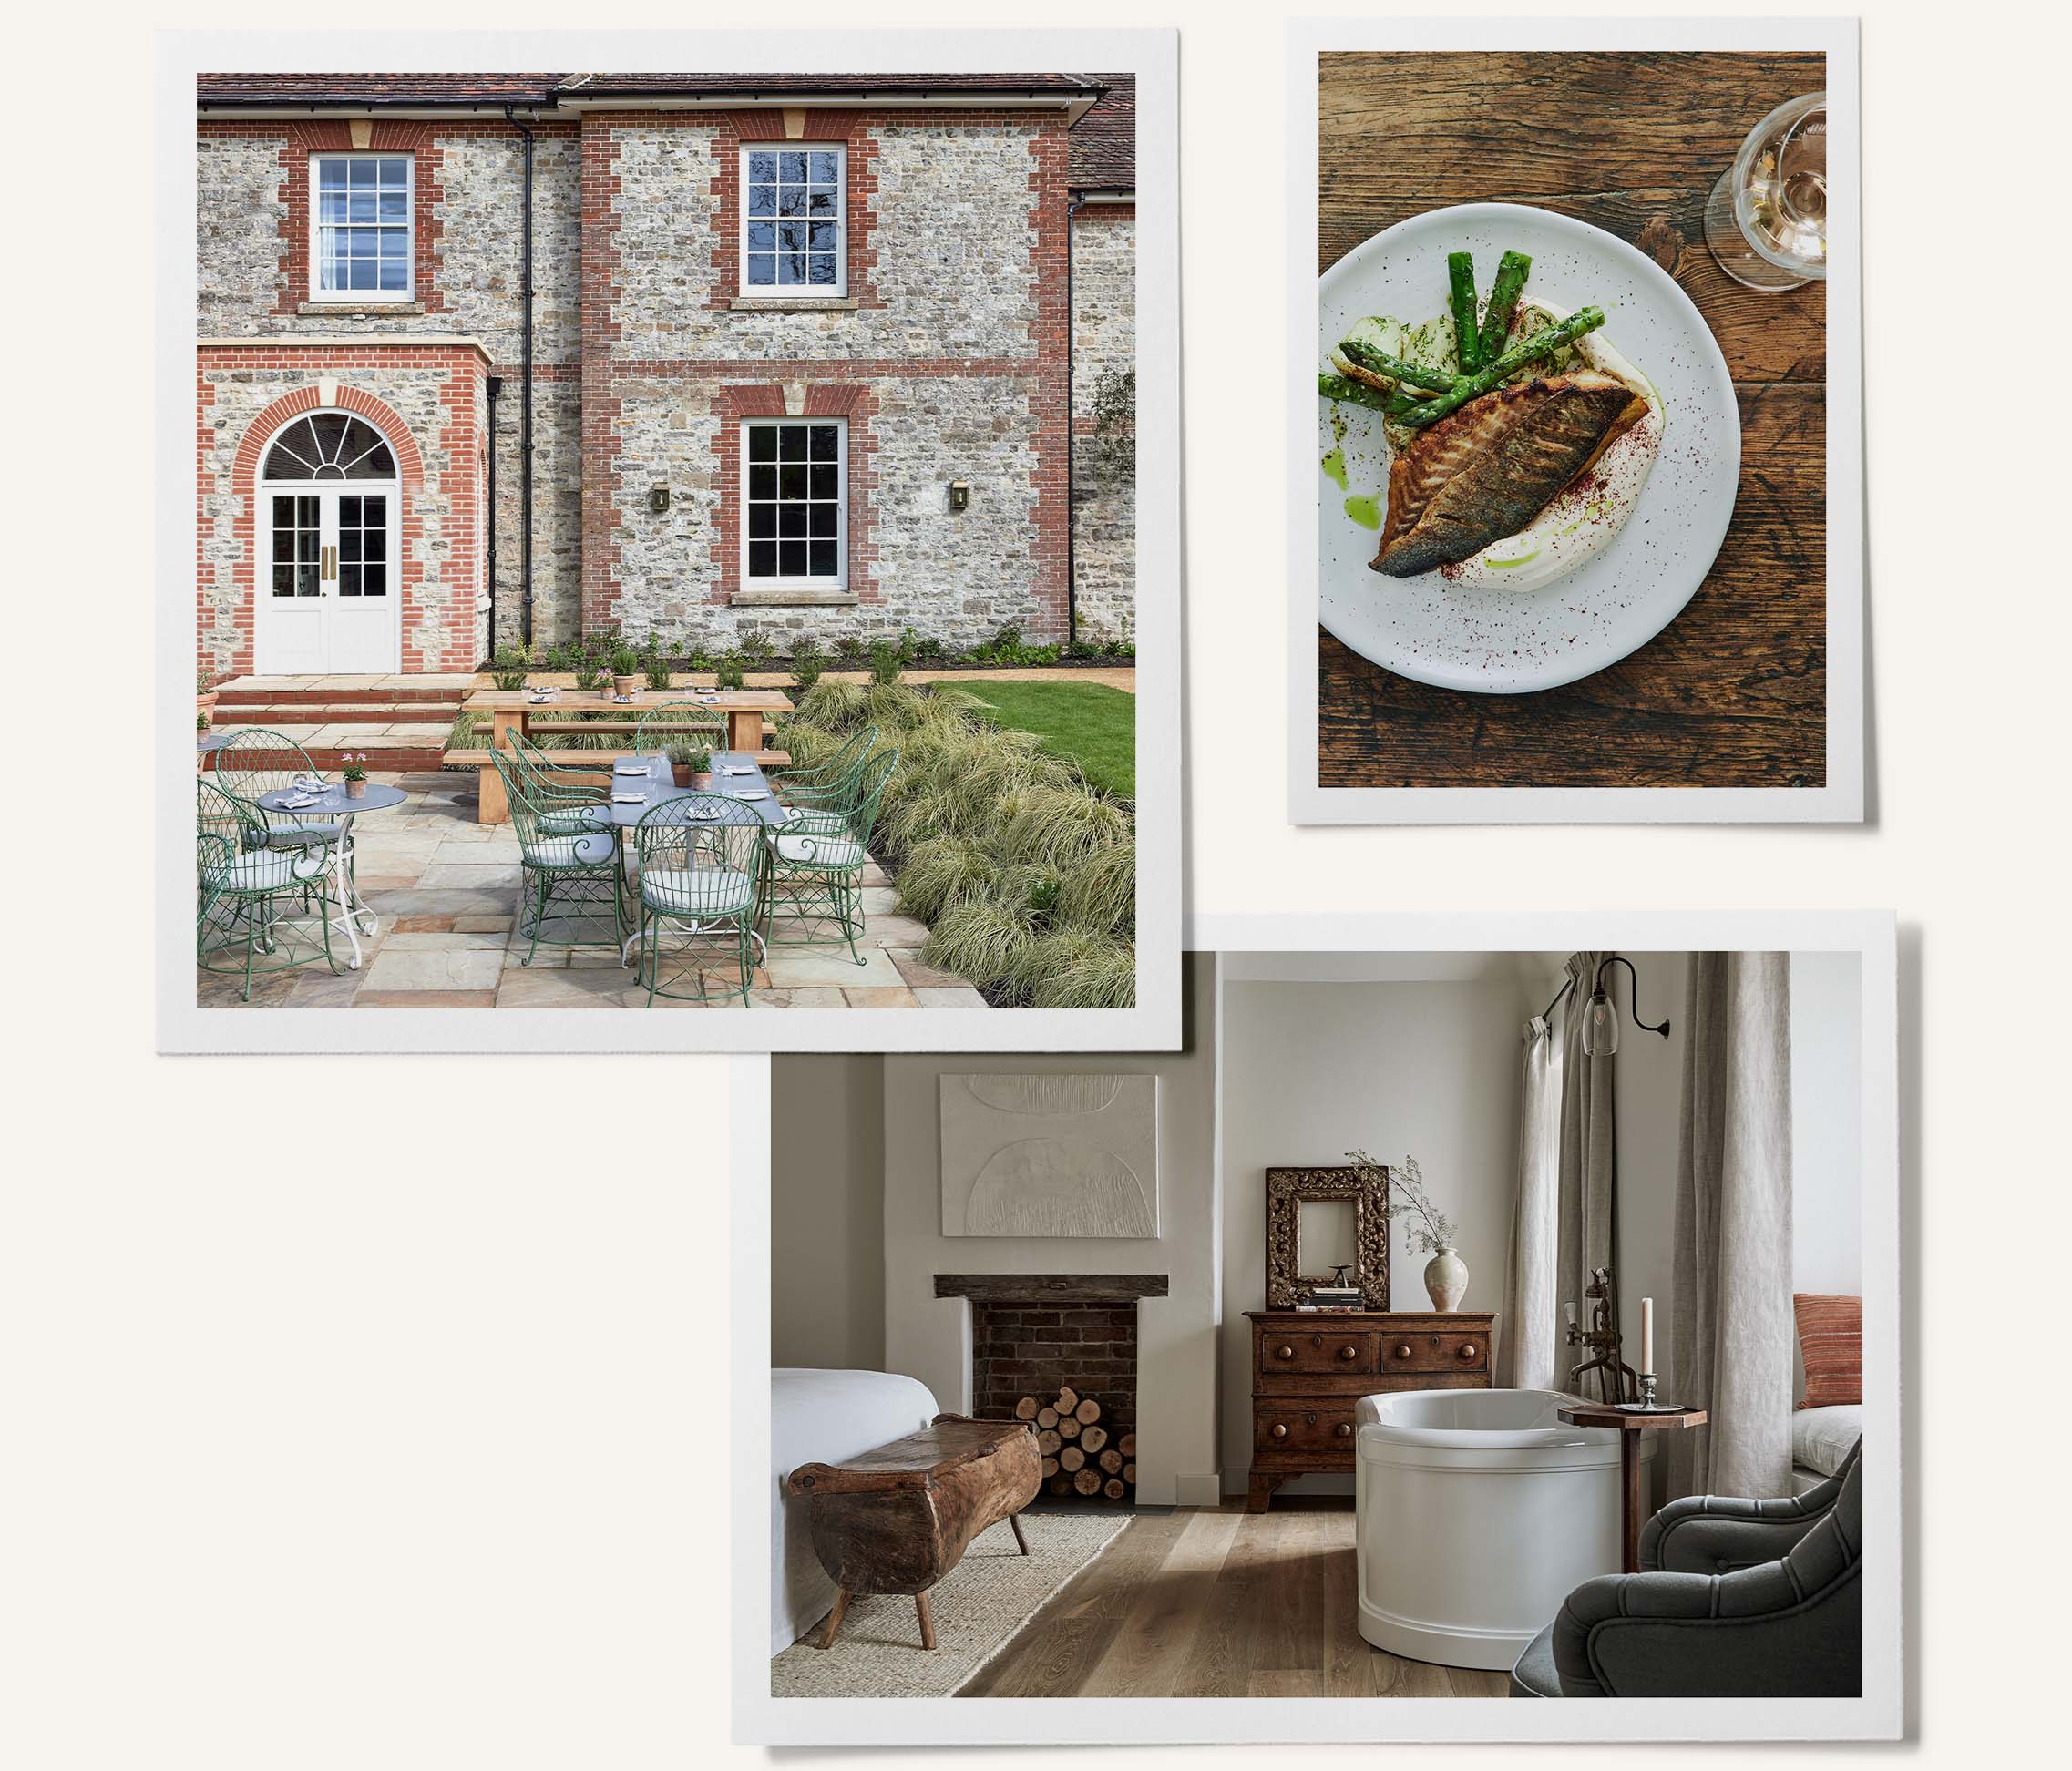 Three images show the a garden courtyard at The Bradley Hare, an aerial shot of a fish dish and a cosy bedroom with a freestanding bath tub.